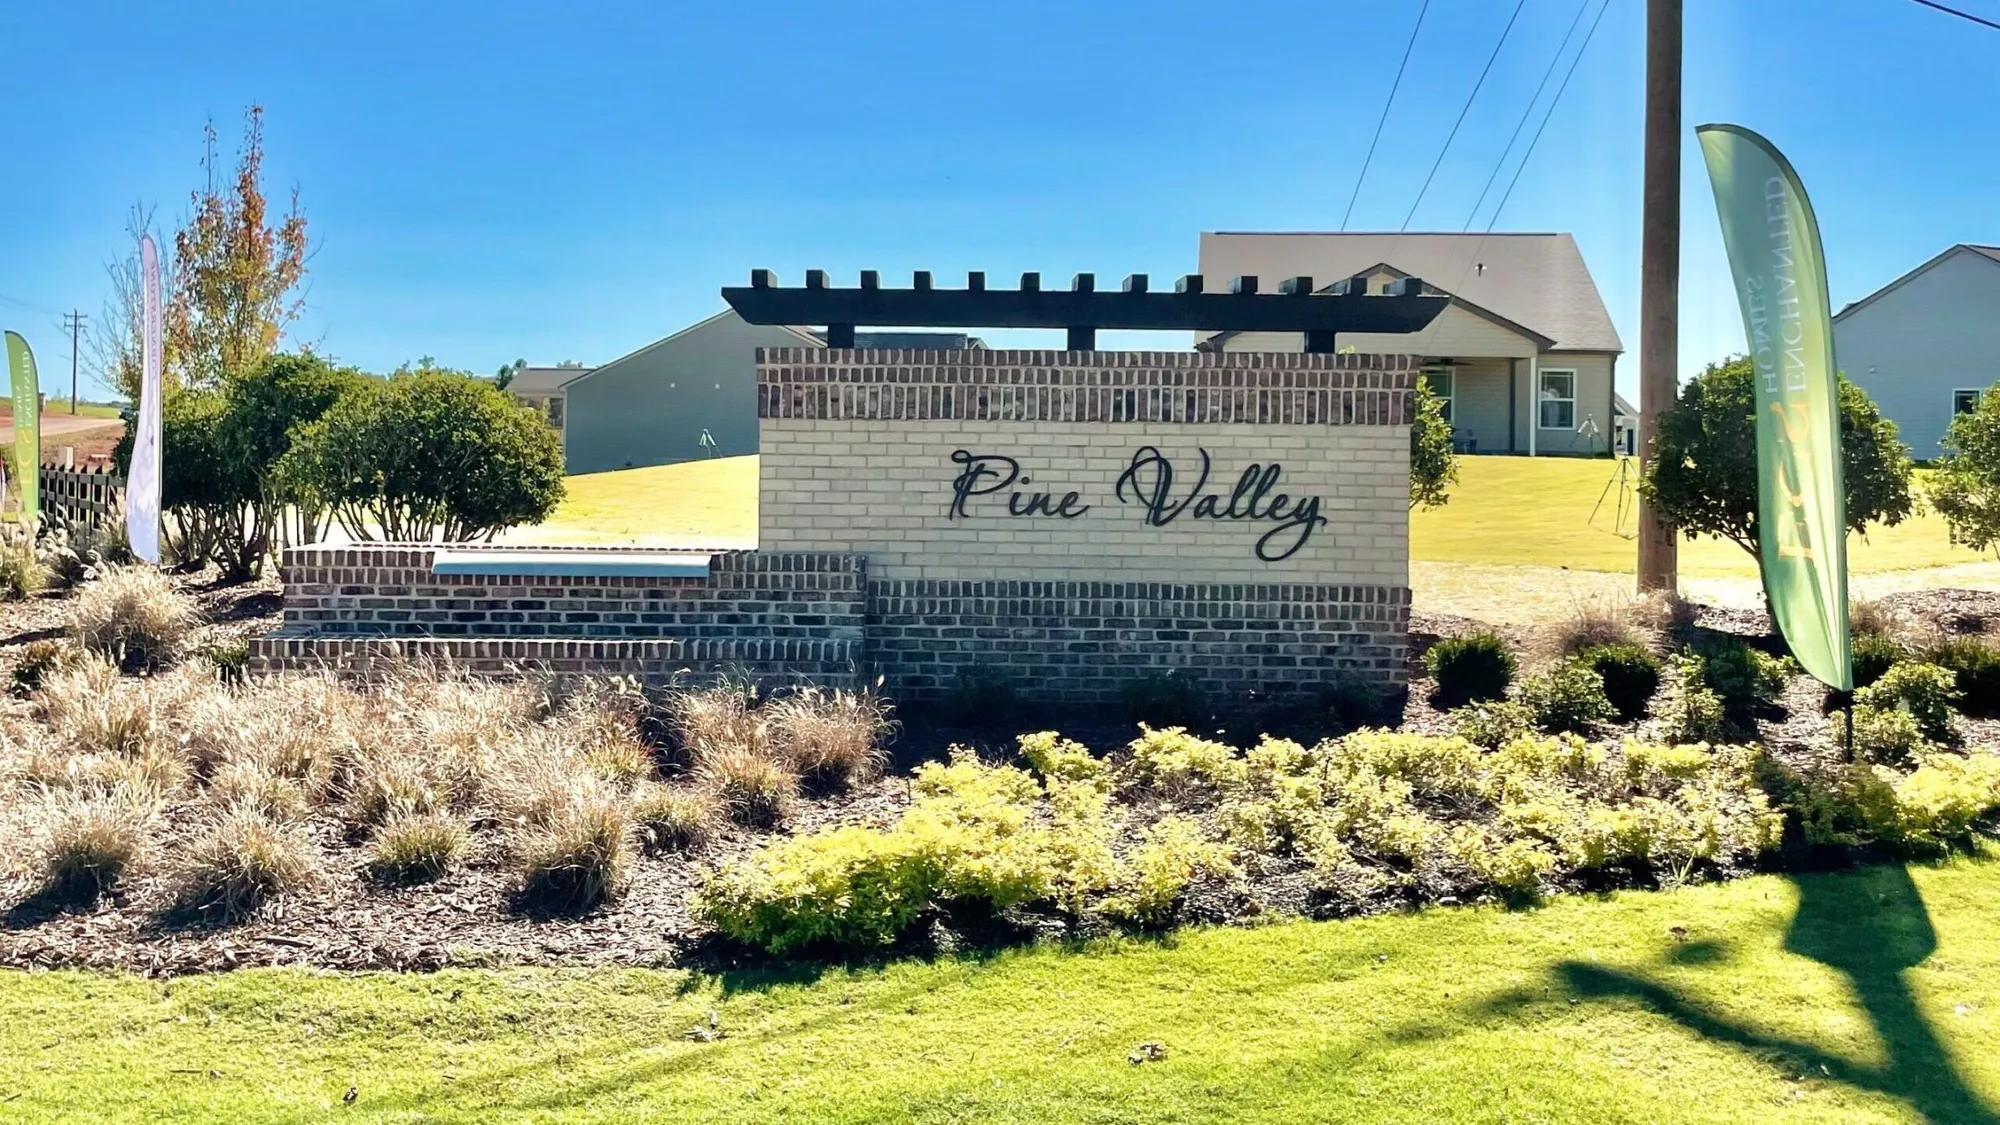 entrance of the pine valley community